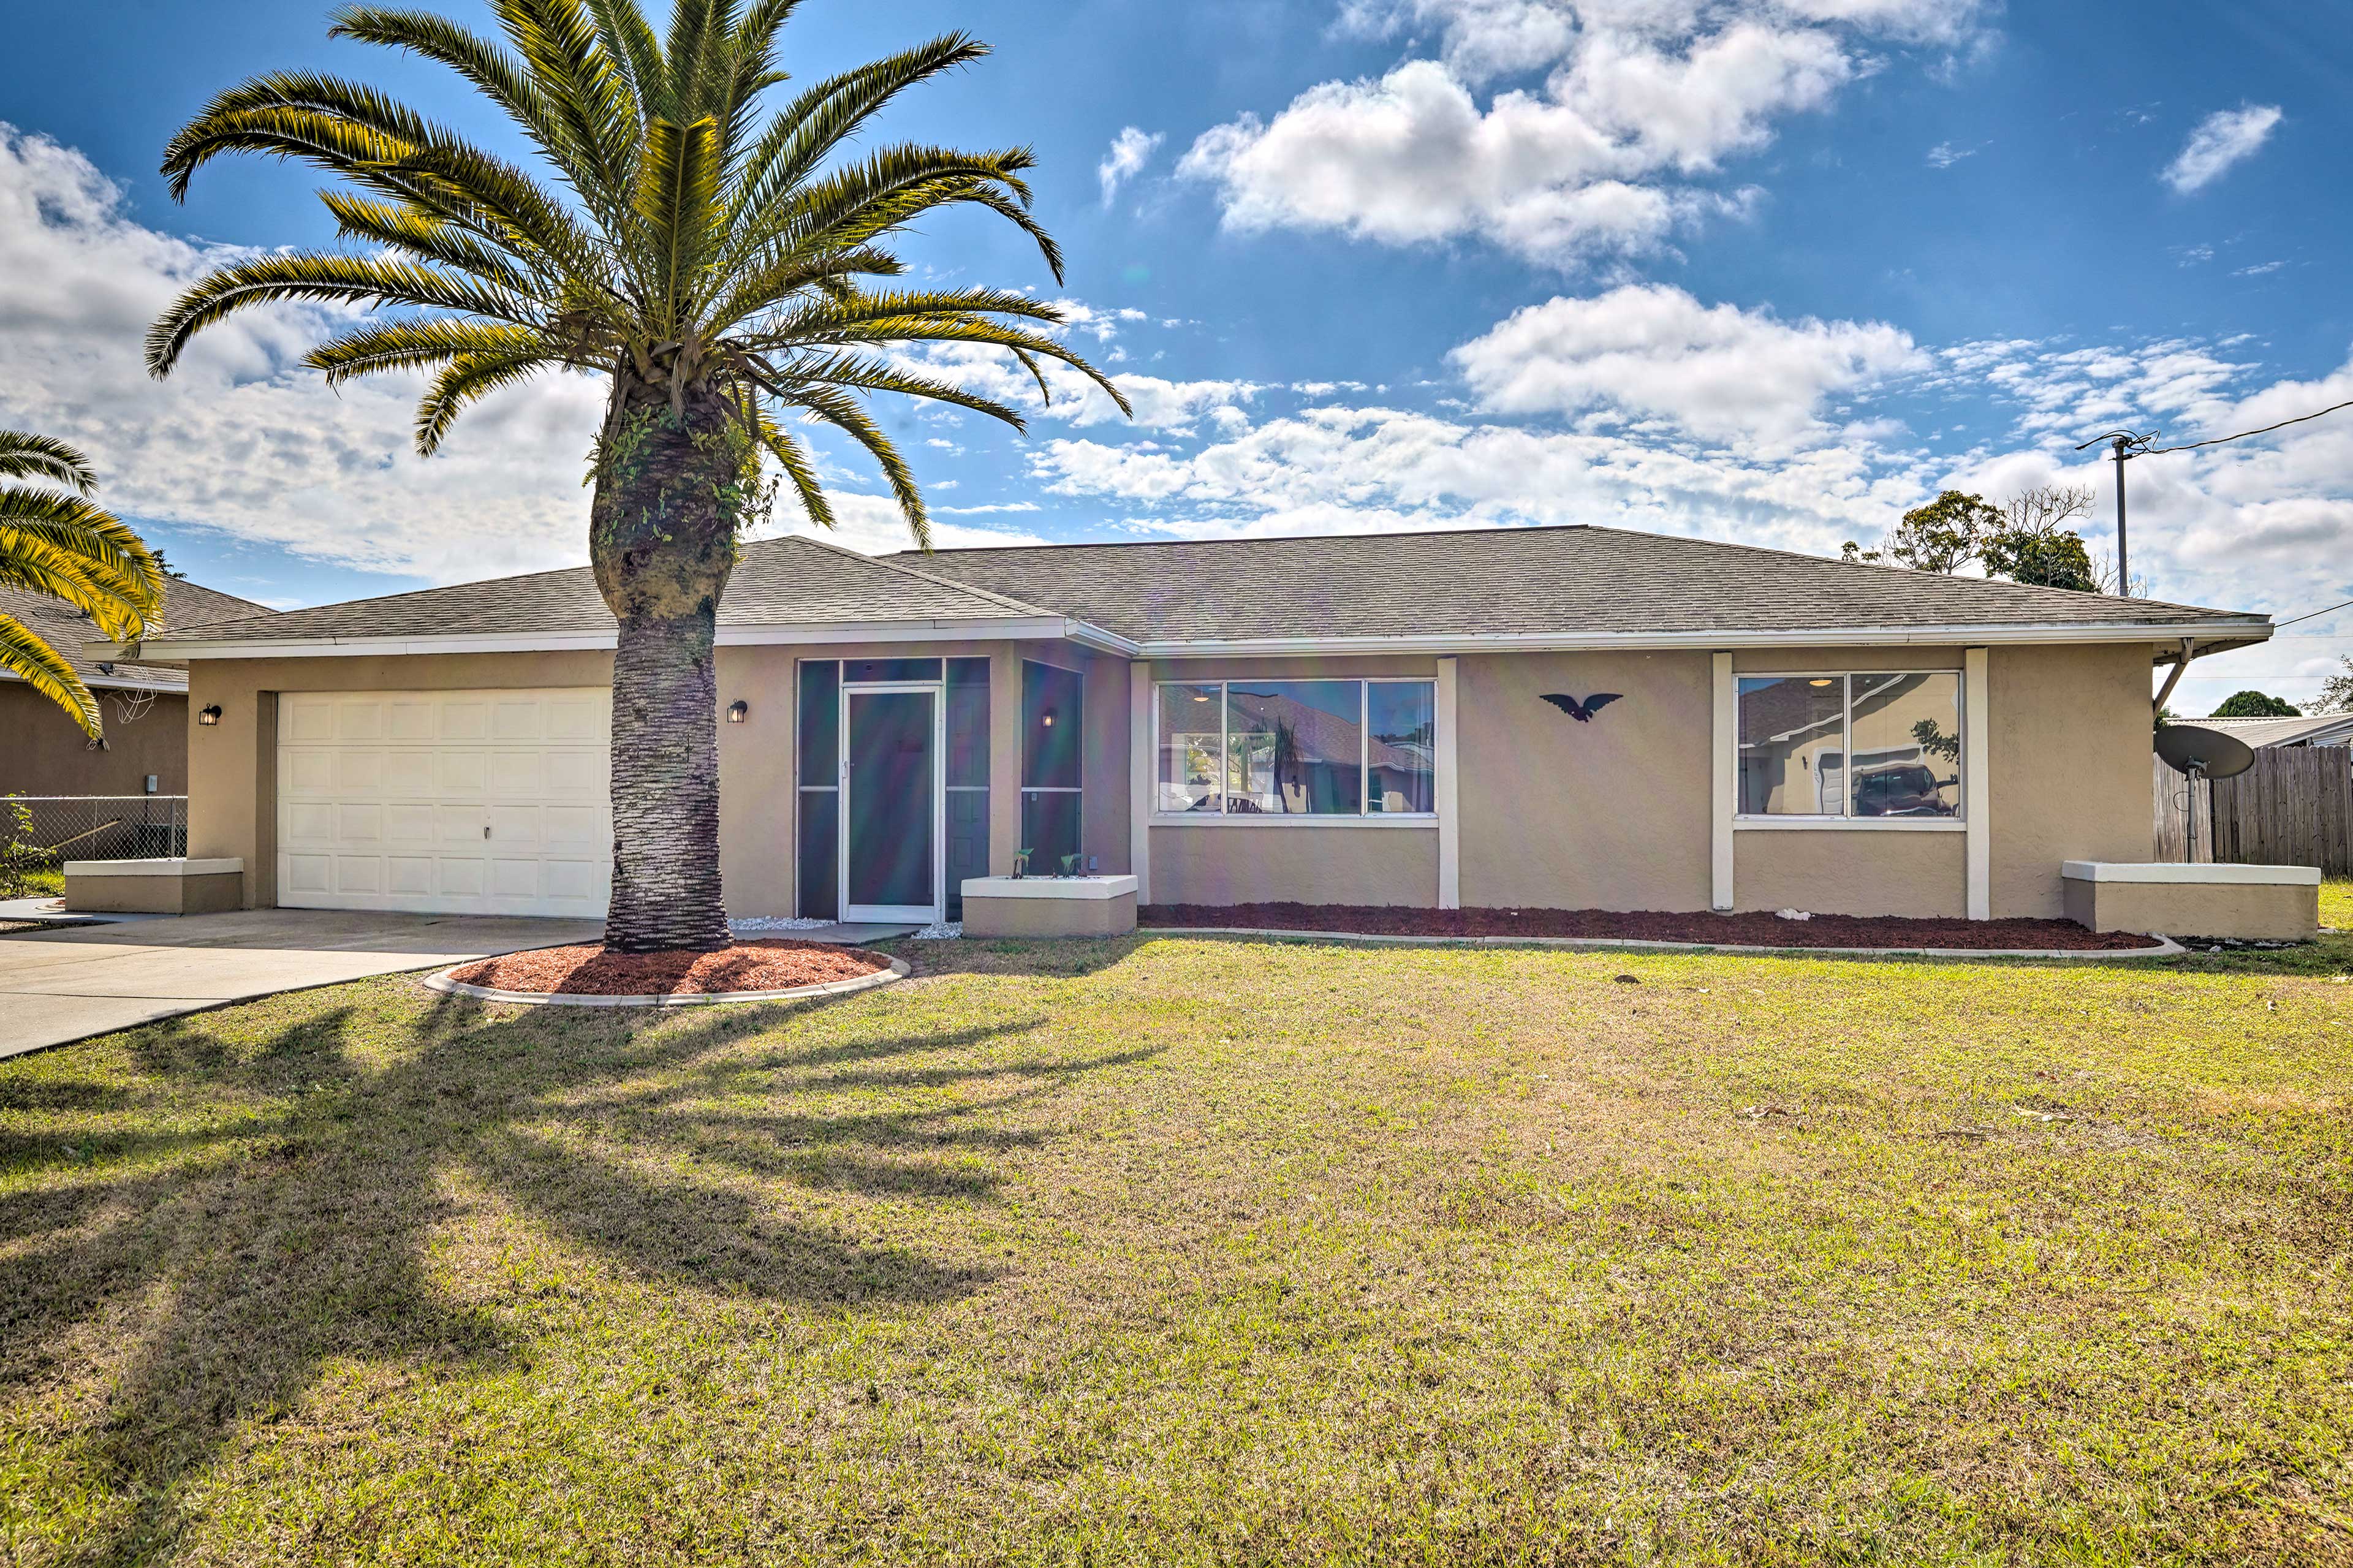 Cape Coral Vacation Rental | 3BR | 2BA | 1,425 Sq Ft | Step-Free Access